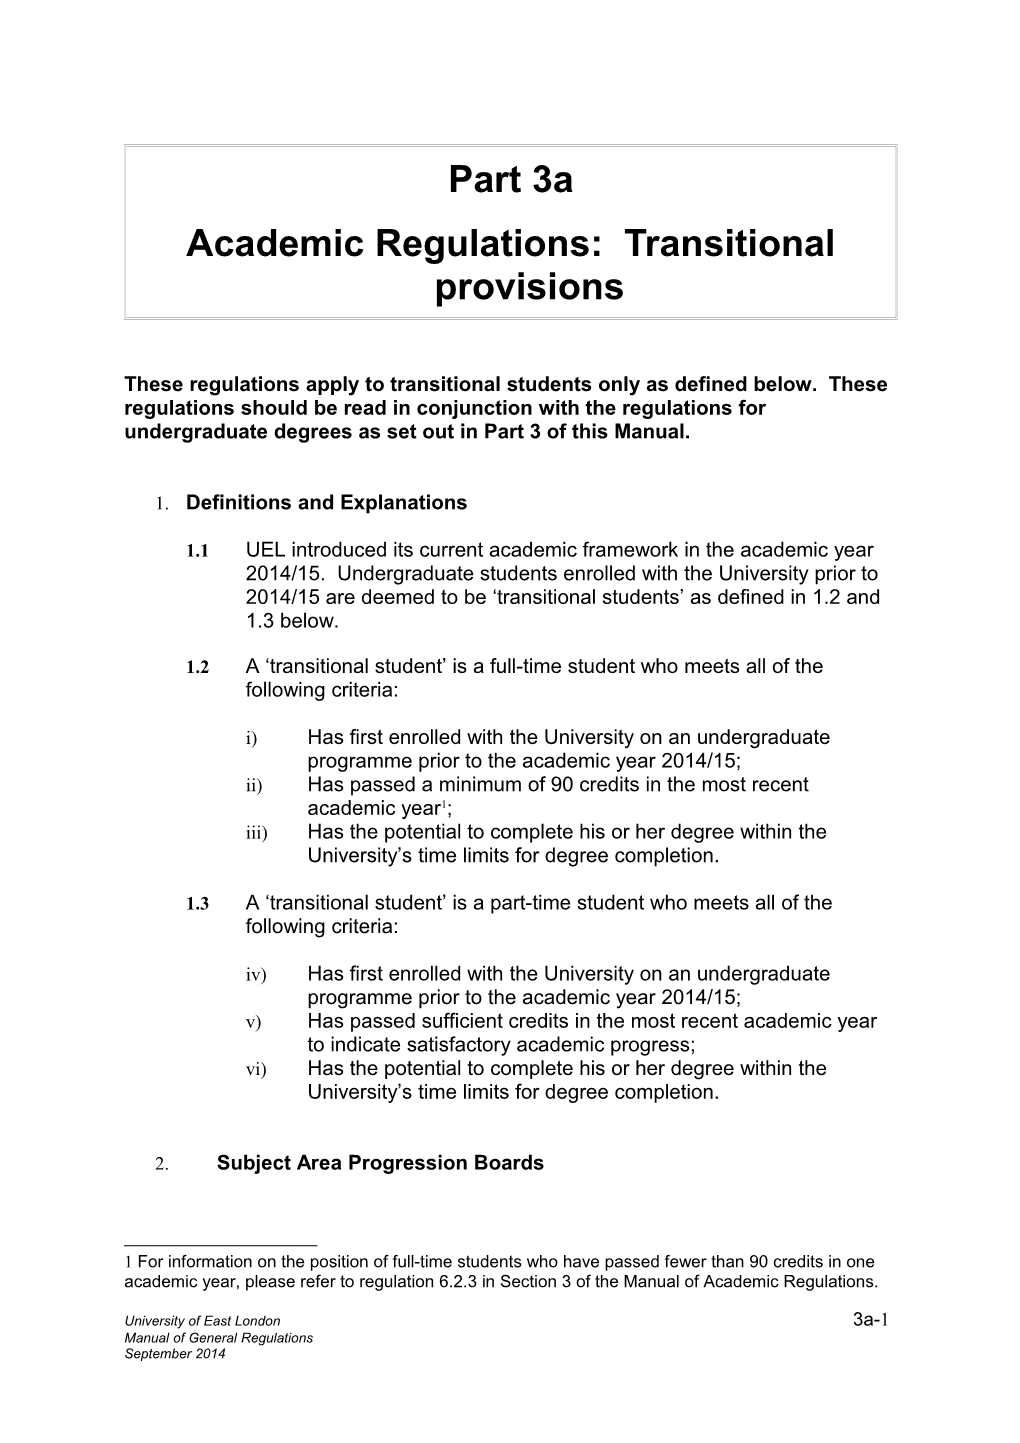 Academic Regulations: Transitional Provisions